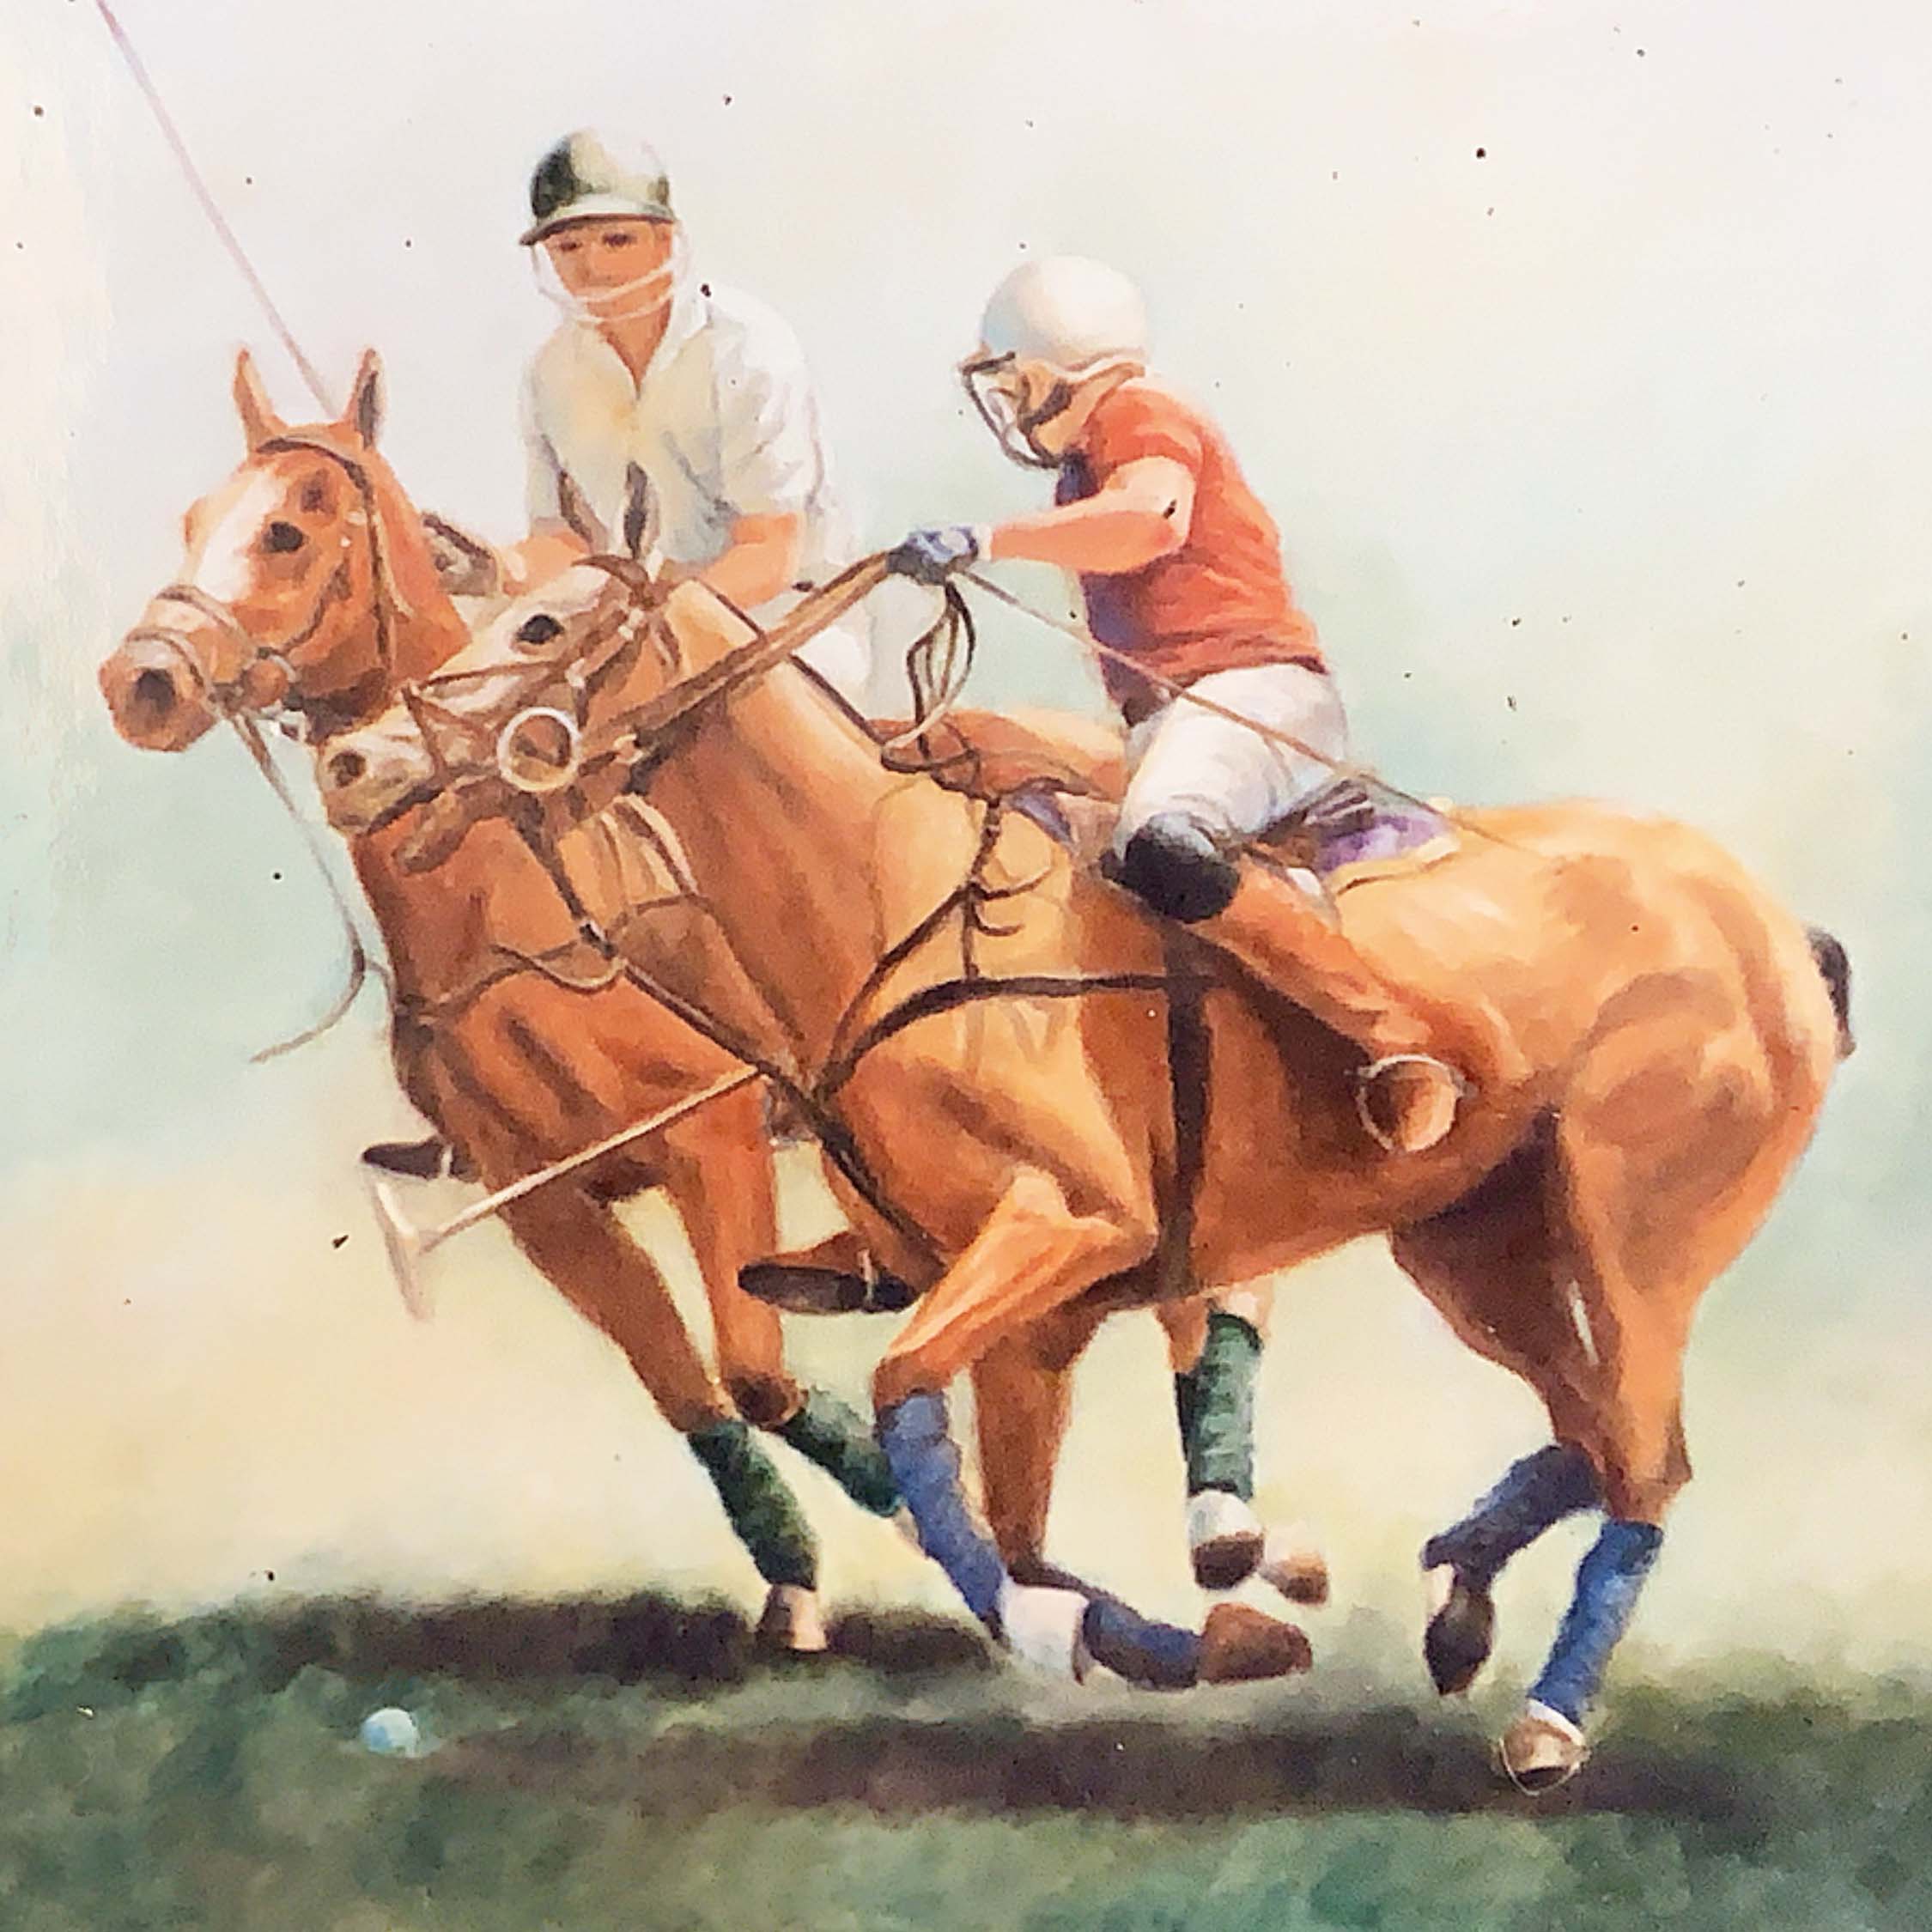 Portrait of two men atop their horses, playing a match of polo.